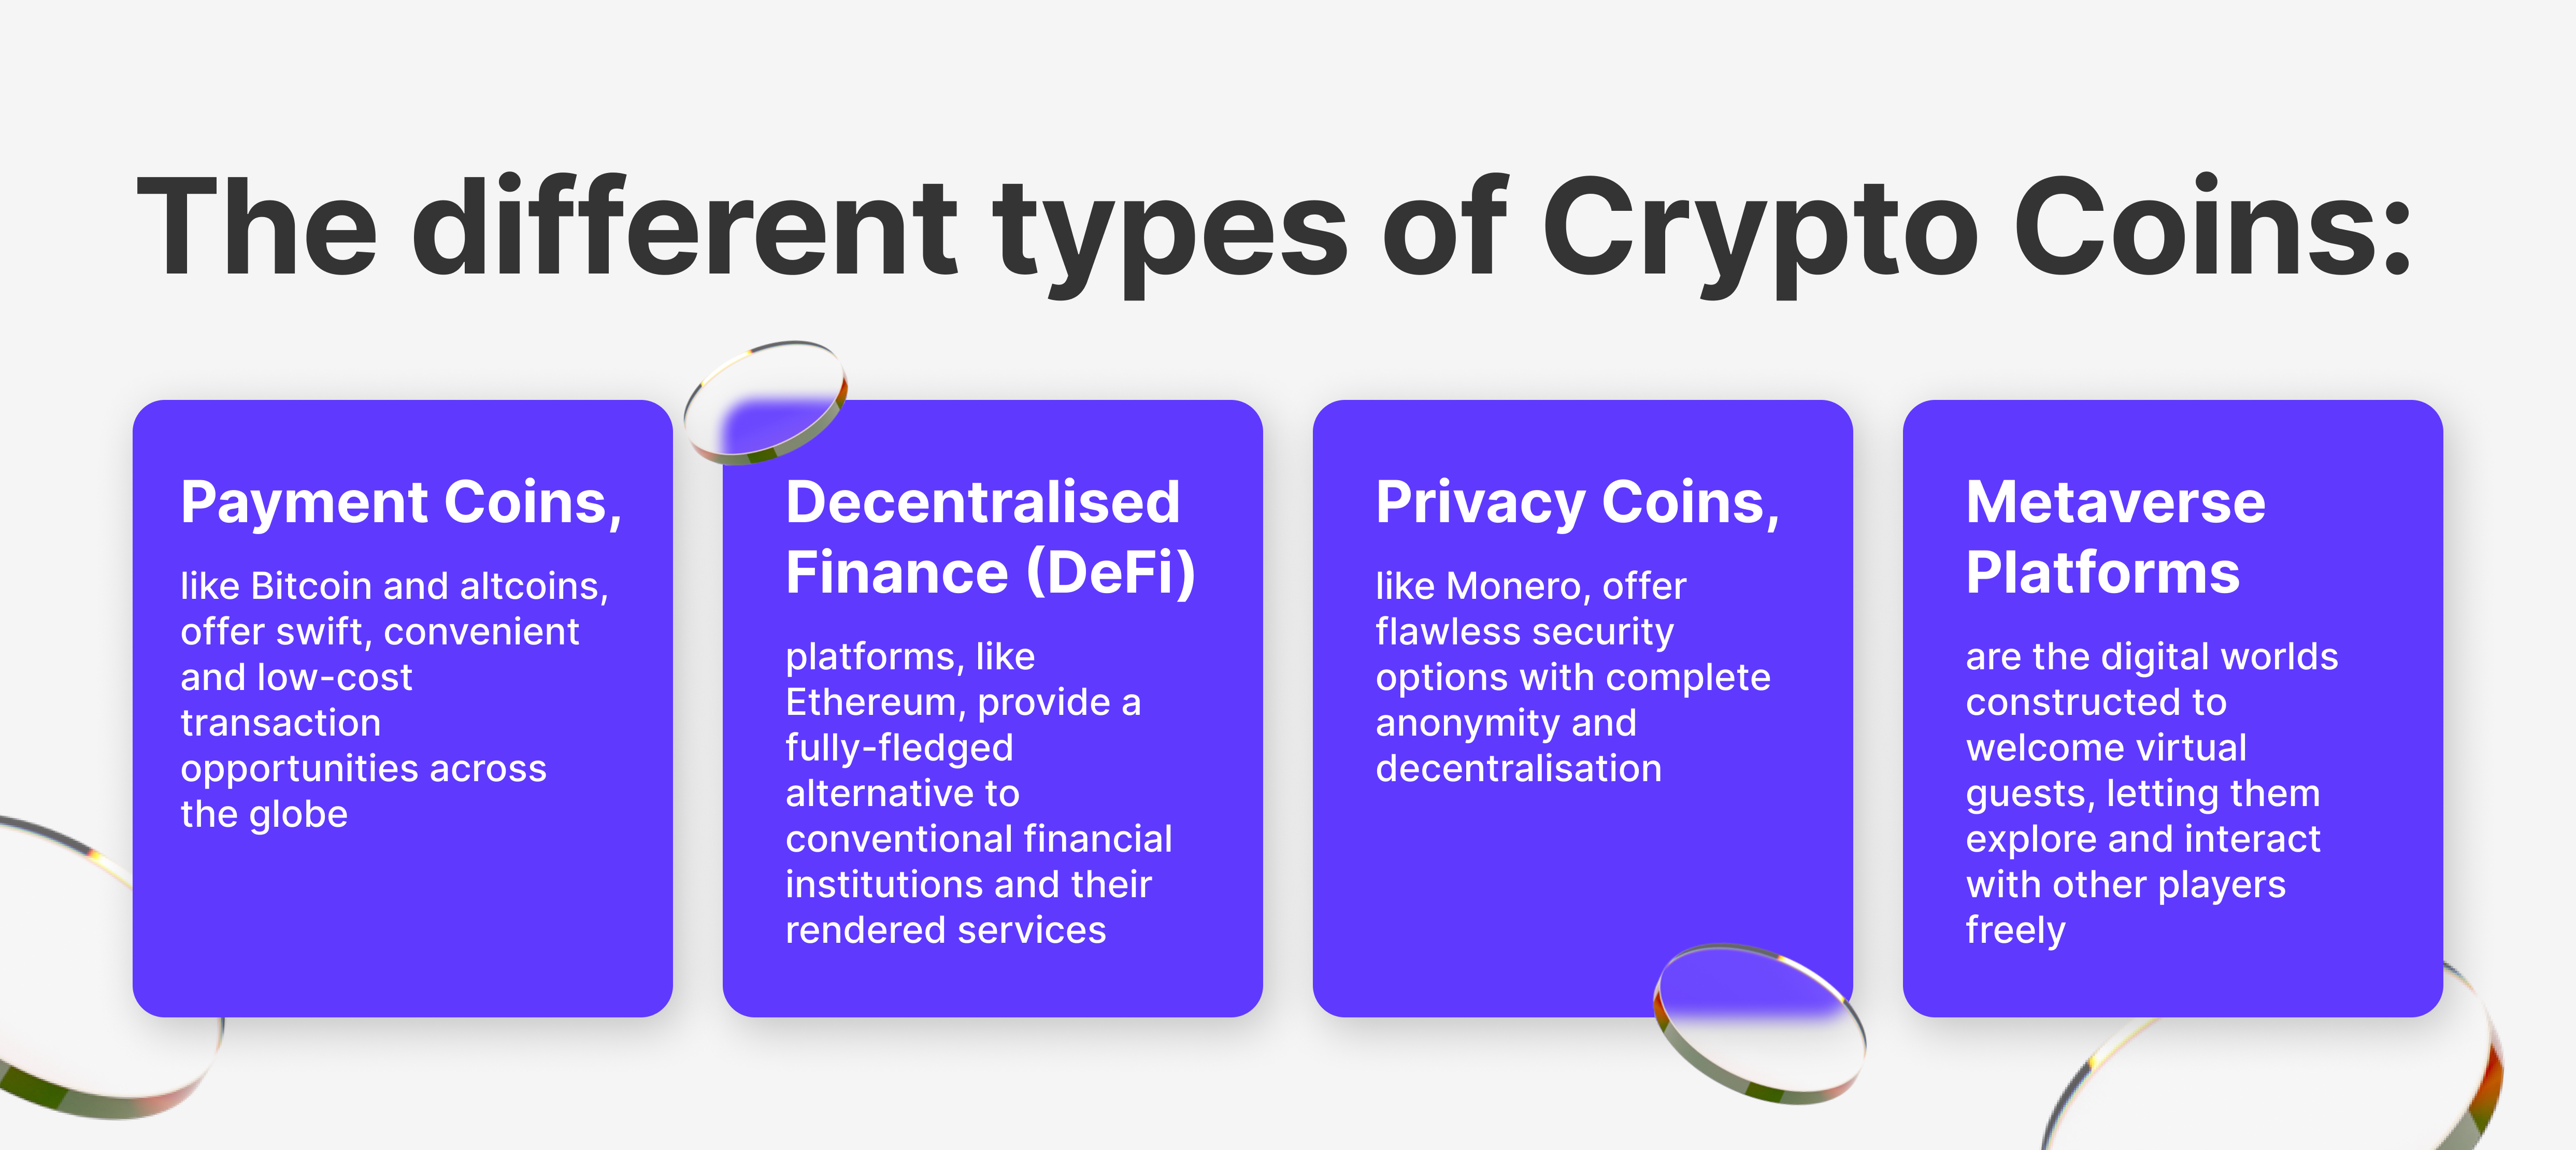 Most popular and established crypto sectors